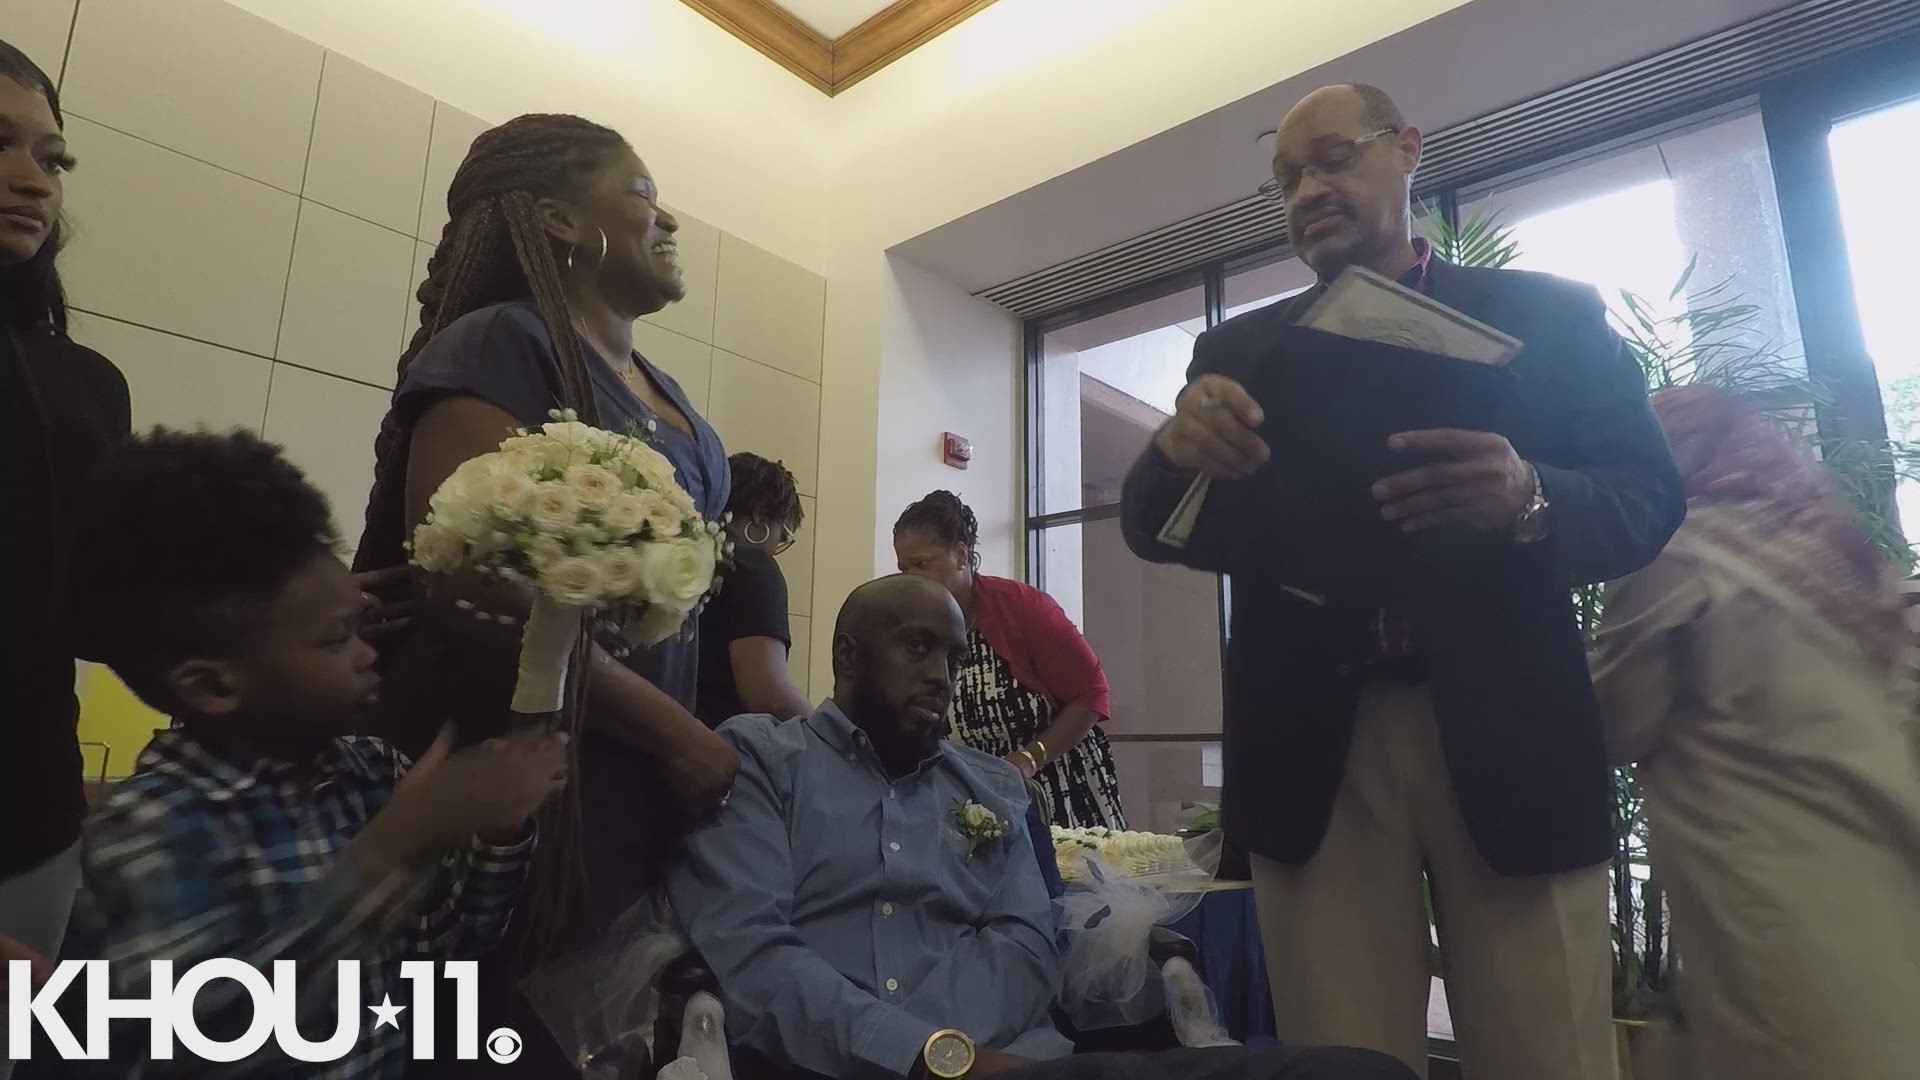 A man diagnosed with terminal brain cancer marries his girlfriend of seven years at a hospital chapel. The emotional ceremony was organized by nurses at the hospital